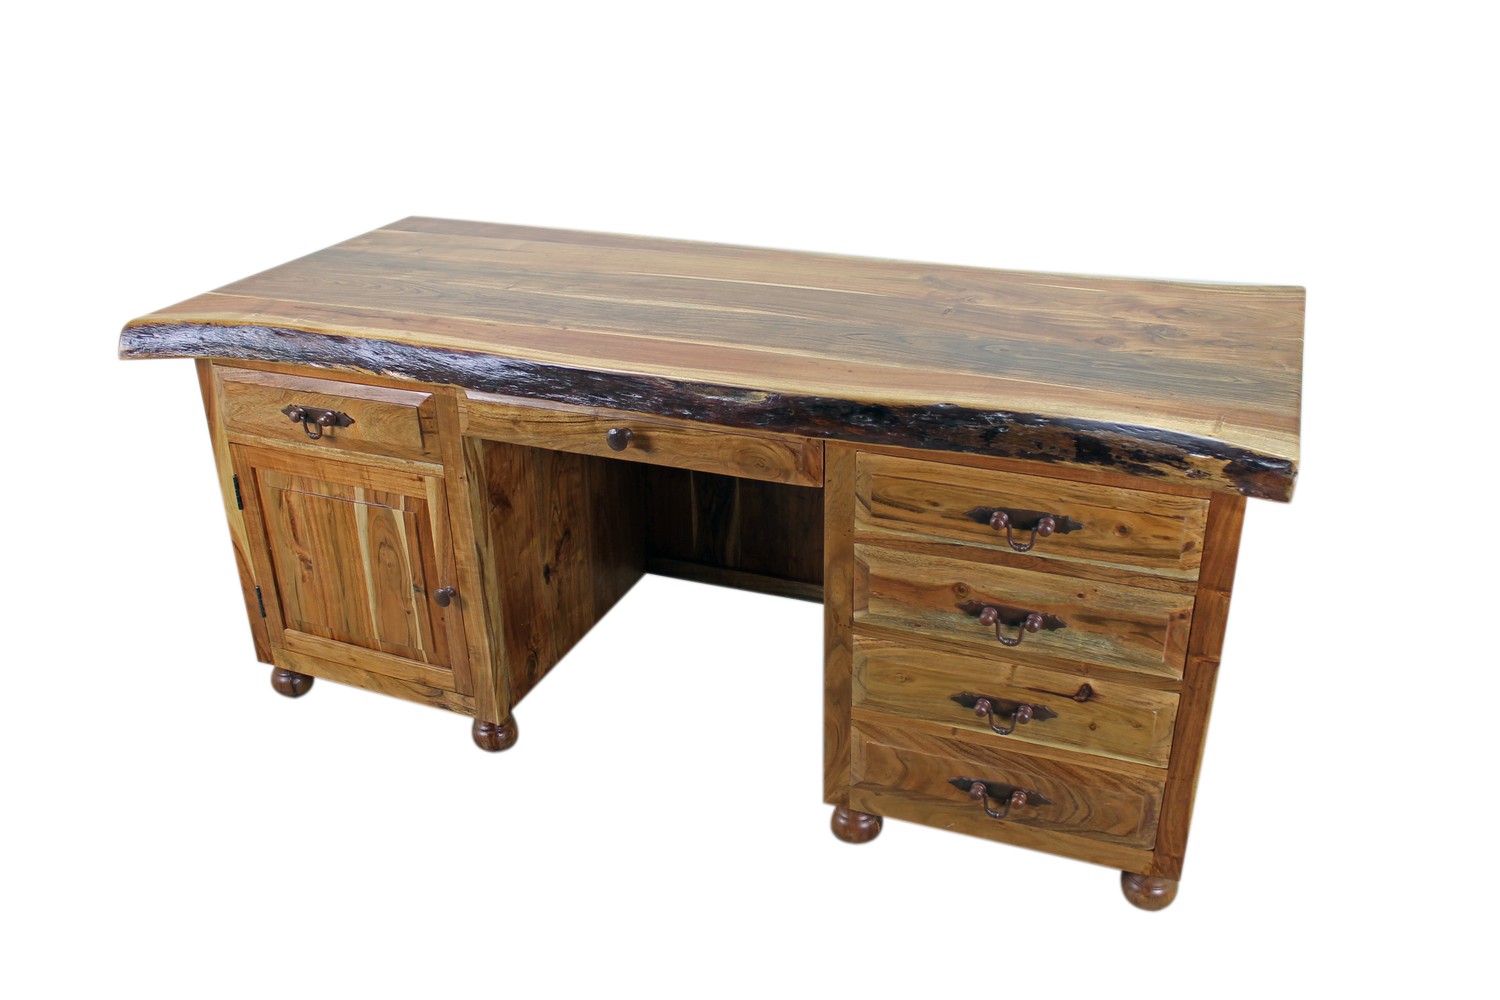 ... Writing Desk | Mexican Rustic Furniture and Home Decor Accessories